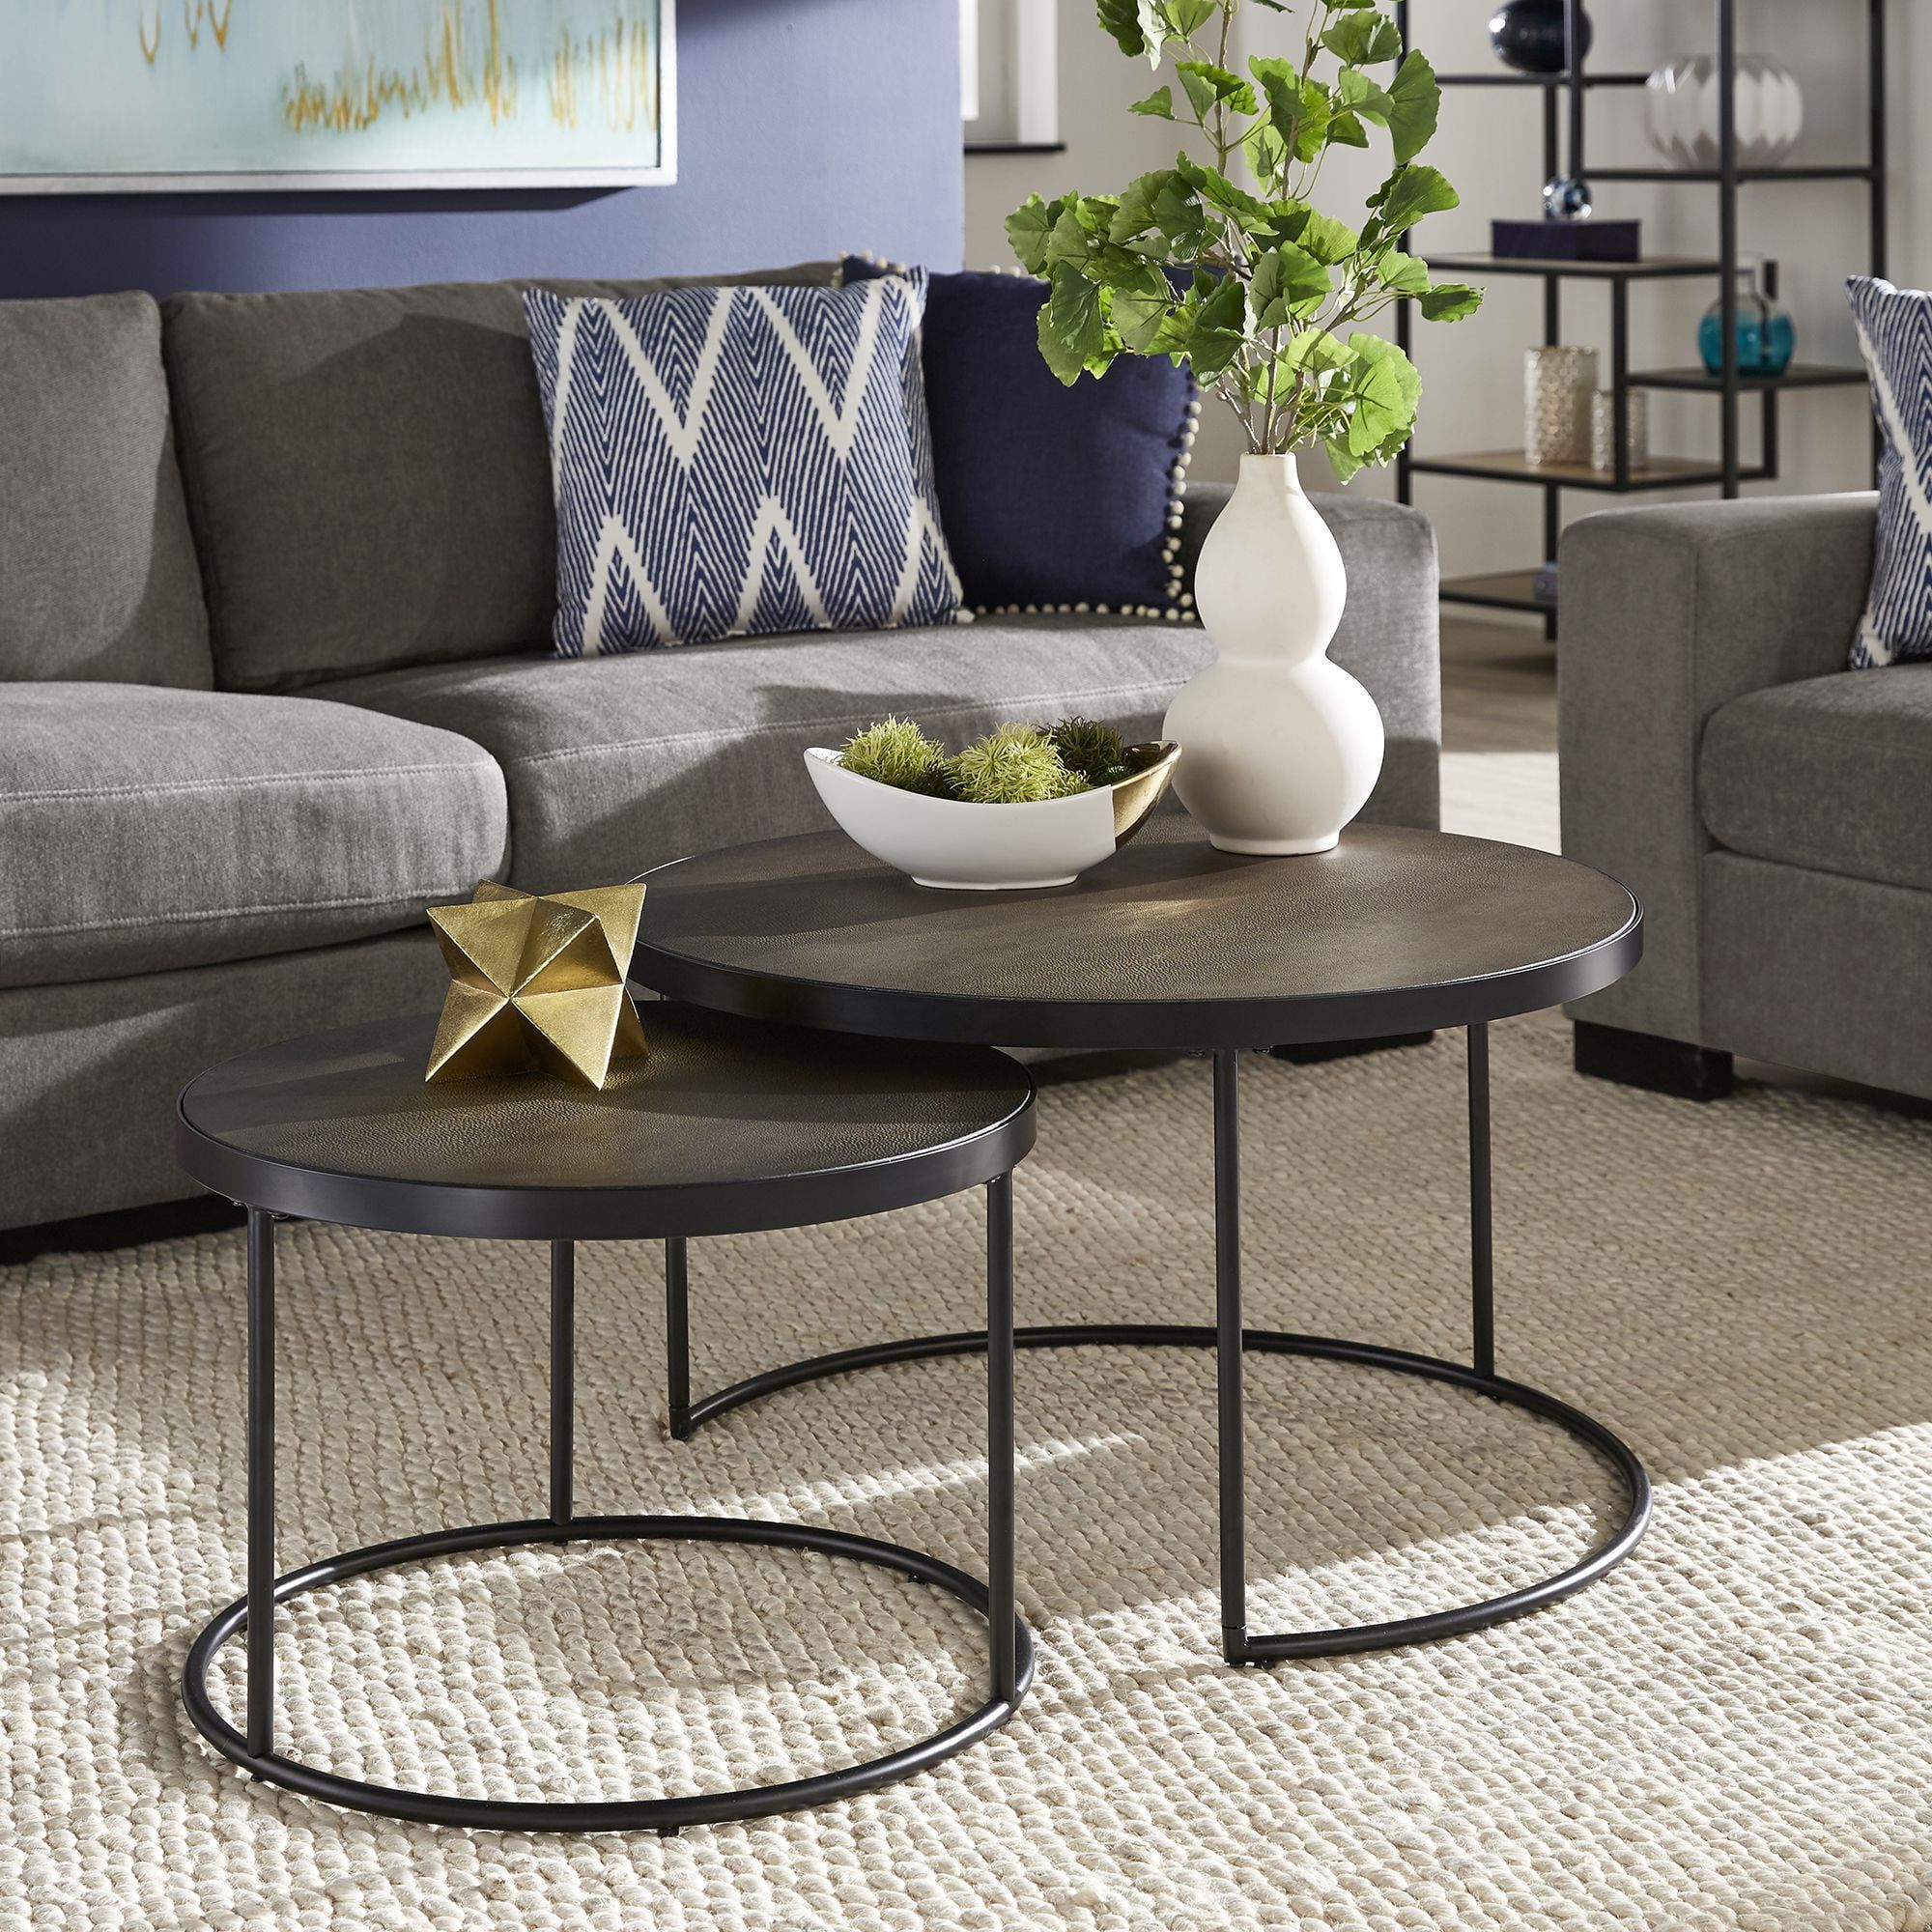 Weston Home Cambridge Black Finish Round Nesting Coffee Tables, Set Of Within Full Black Round Coffee Tables (View 5 of 15)